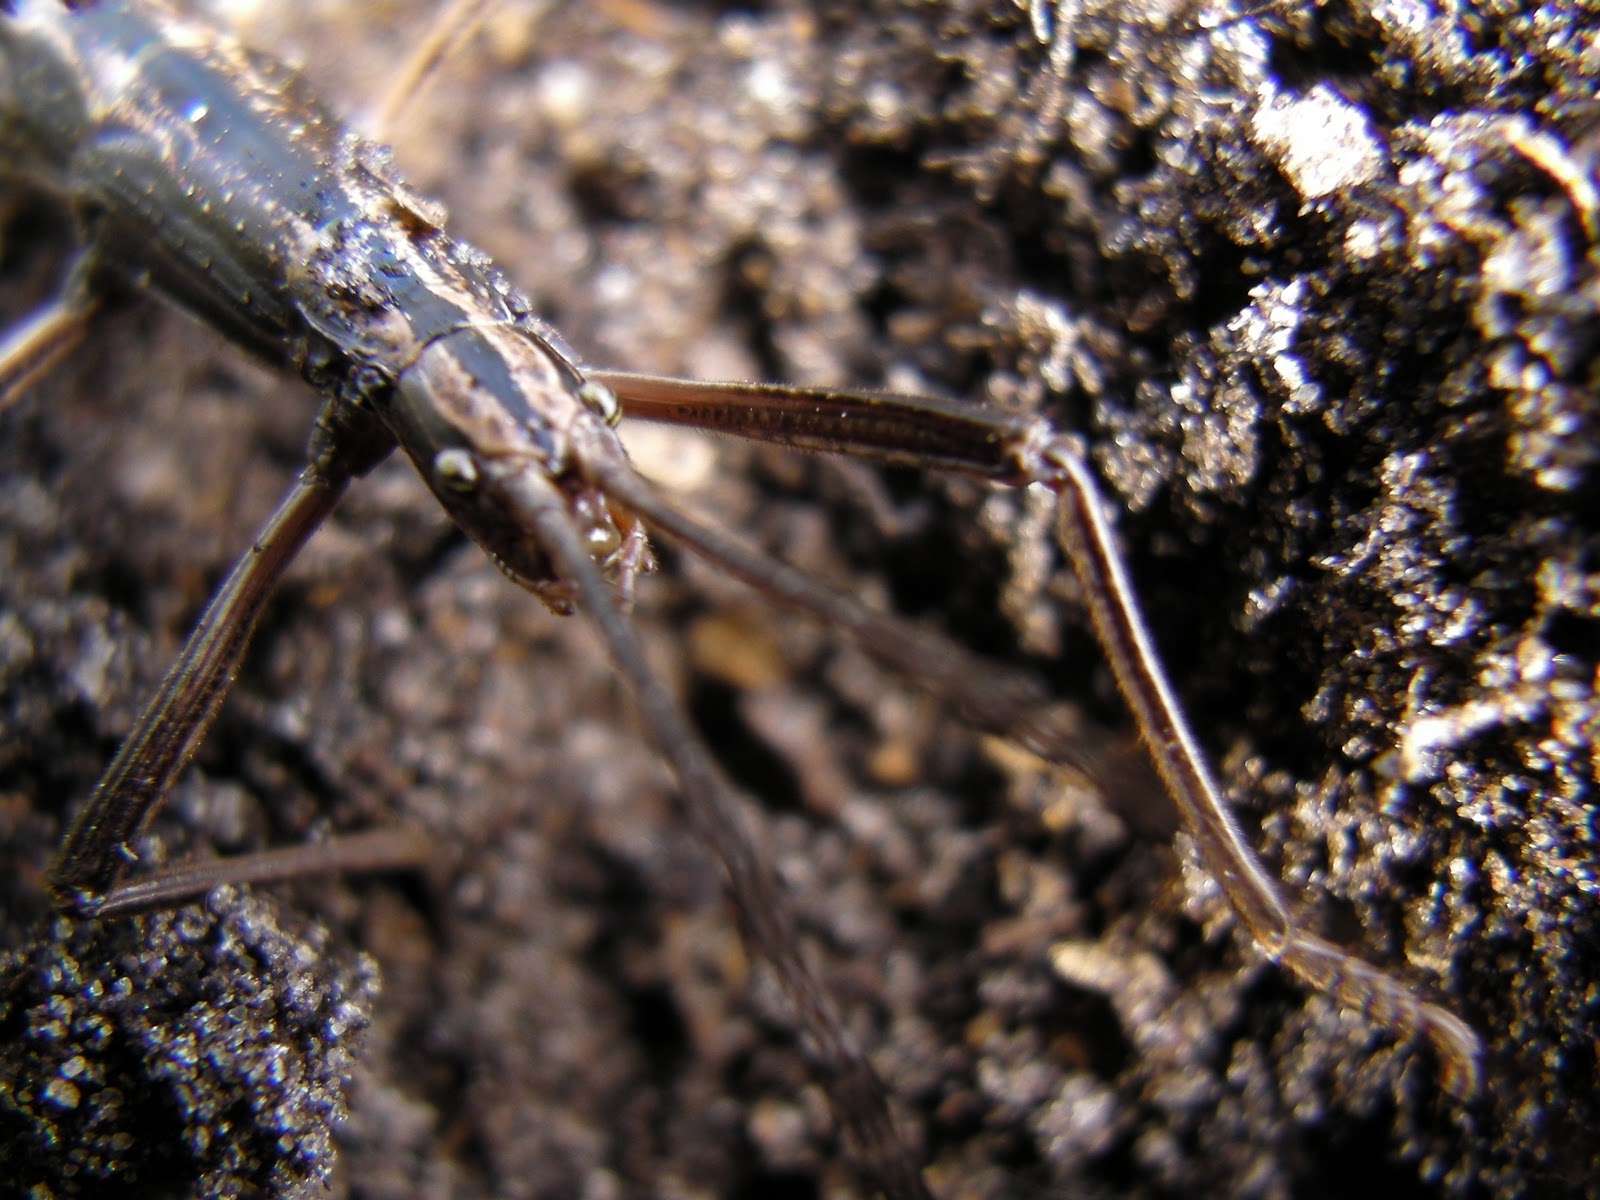 A brown form two-striped walking stick blends into its woody environment. Photo used courtesy of Travis Mitchell.